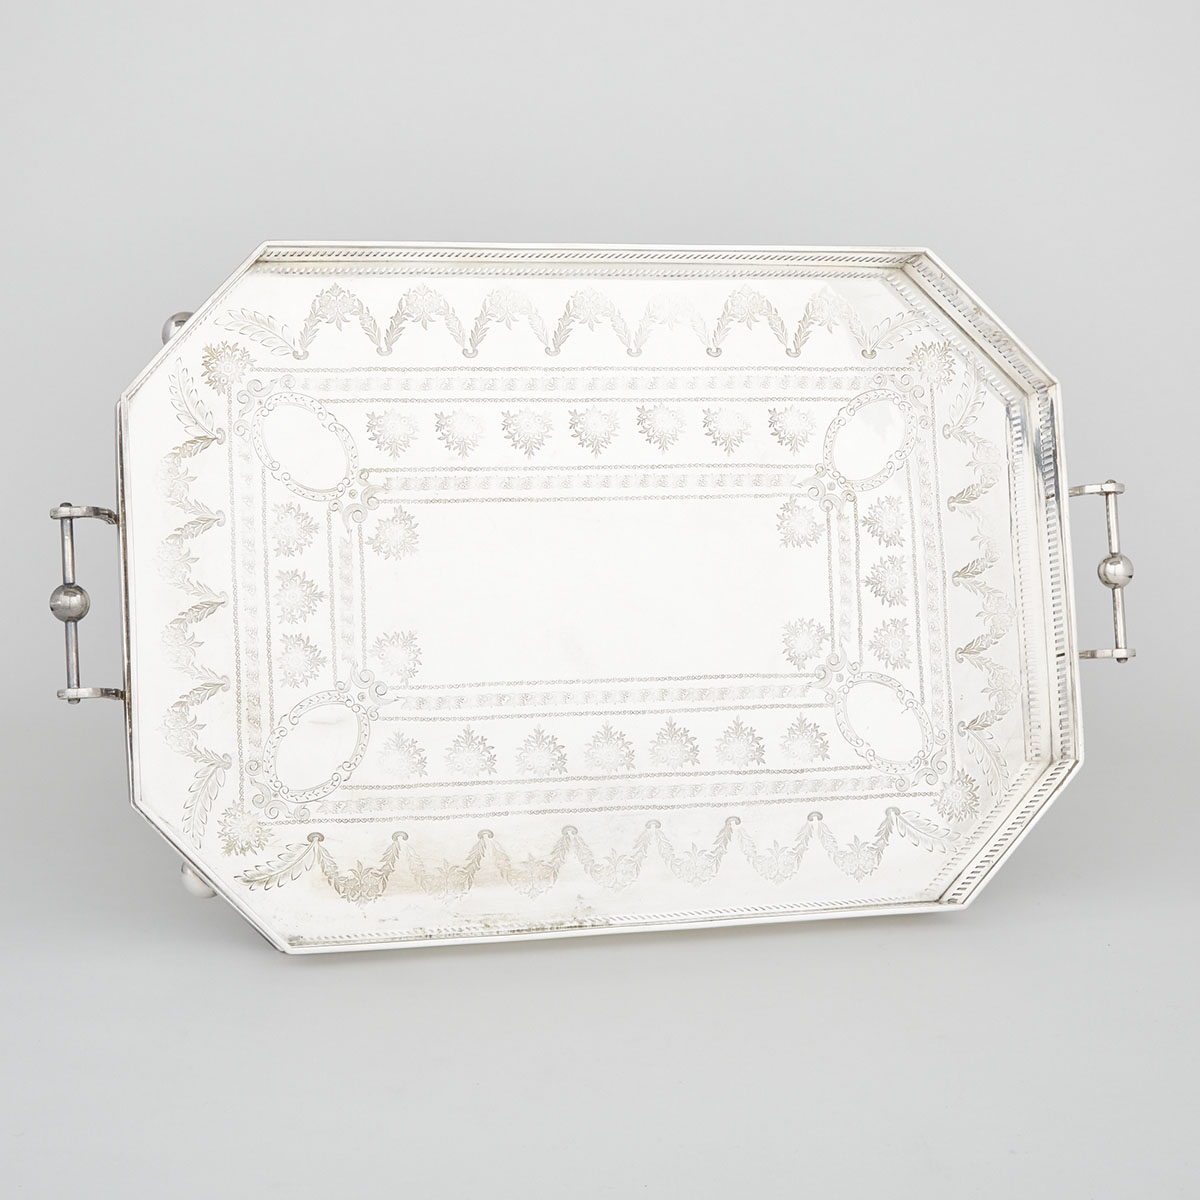 Edwardian Silver Plated Two-Handled Octagonal Galleried Serving Tray, early 20th century